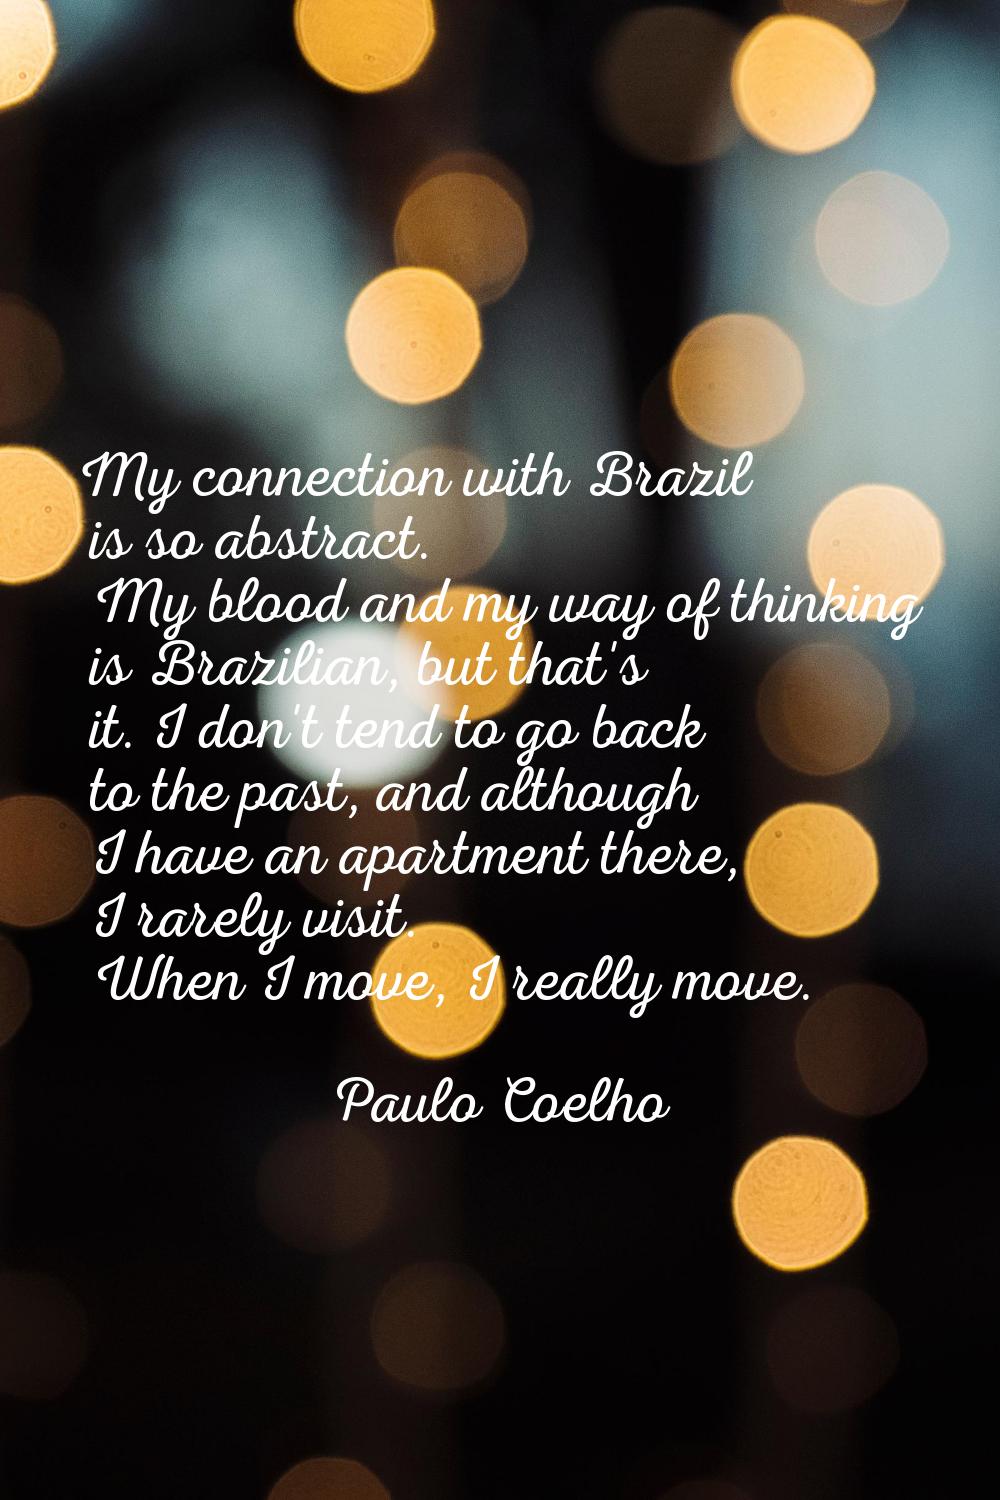 My connection with Brazil is so abstract. My blood and my way of thinking is Brazilian, but that's 